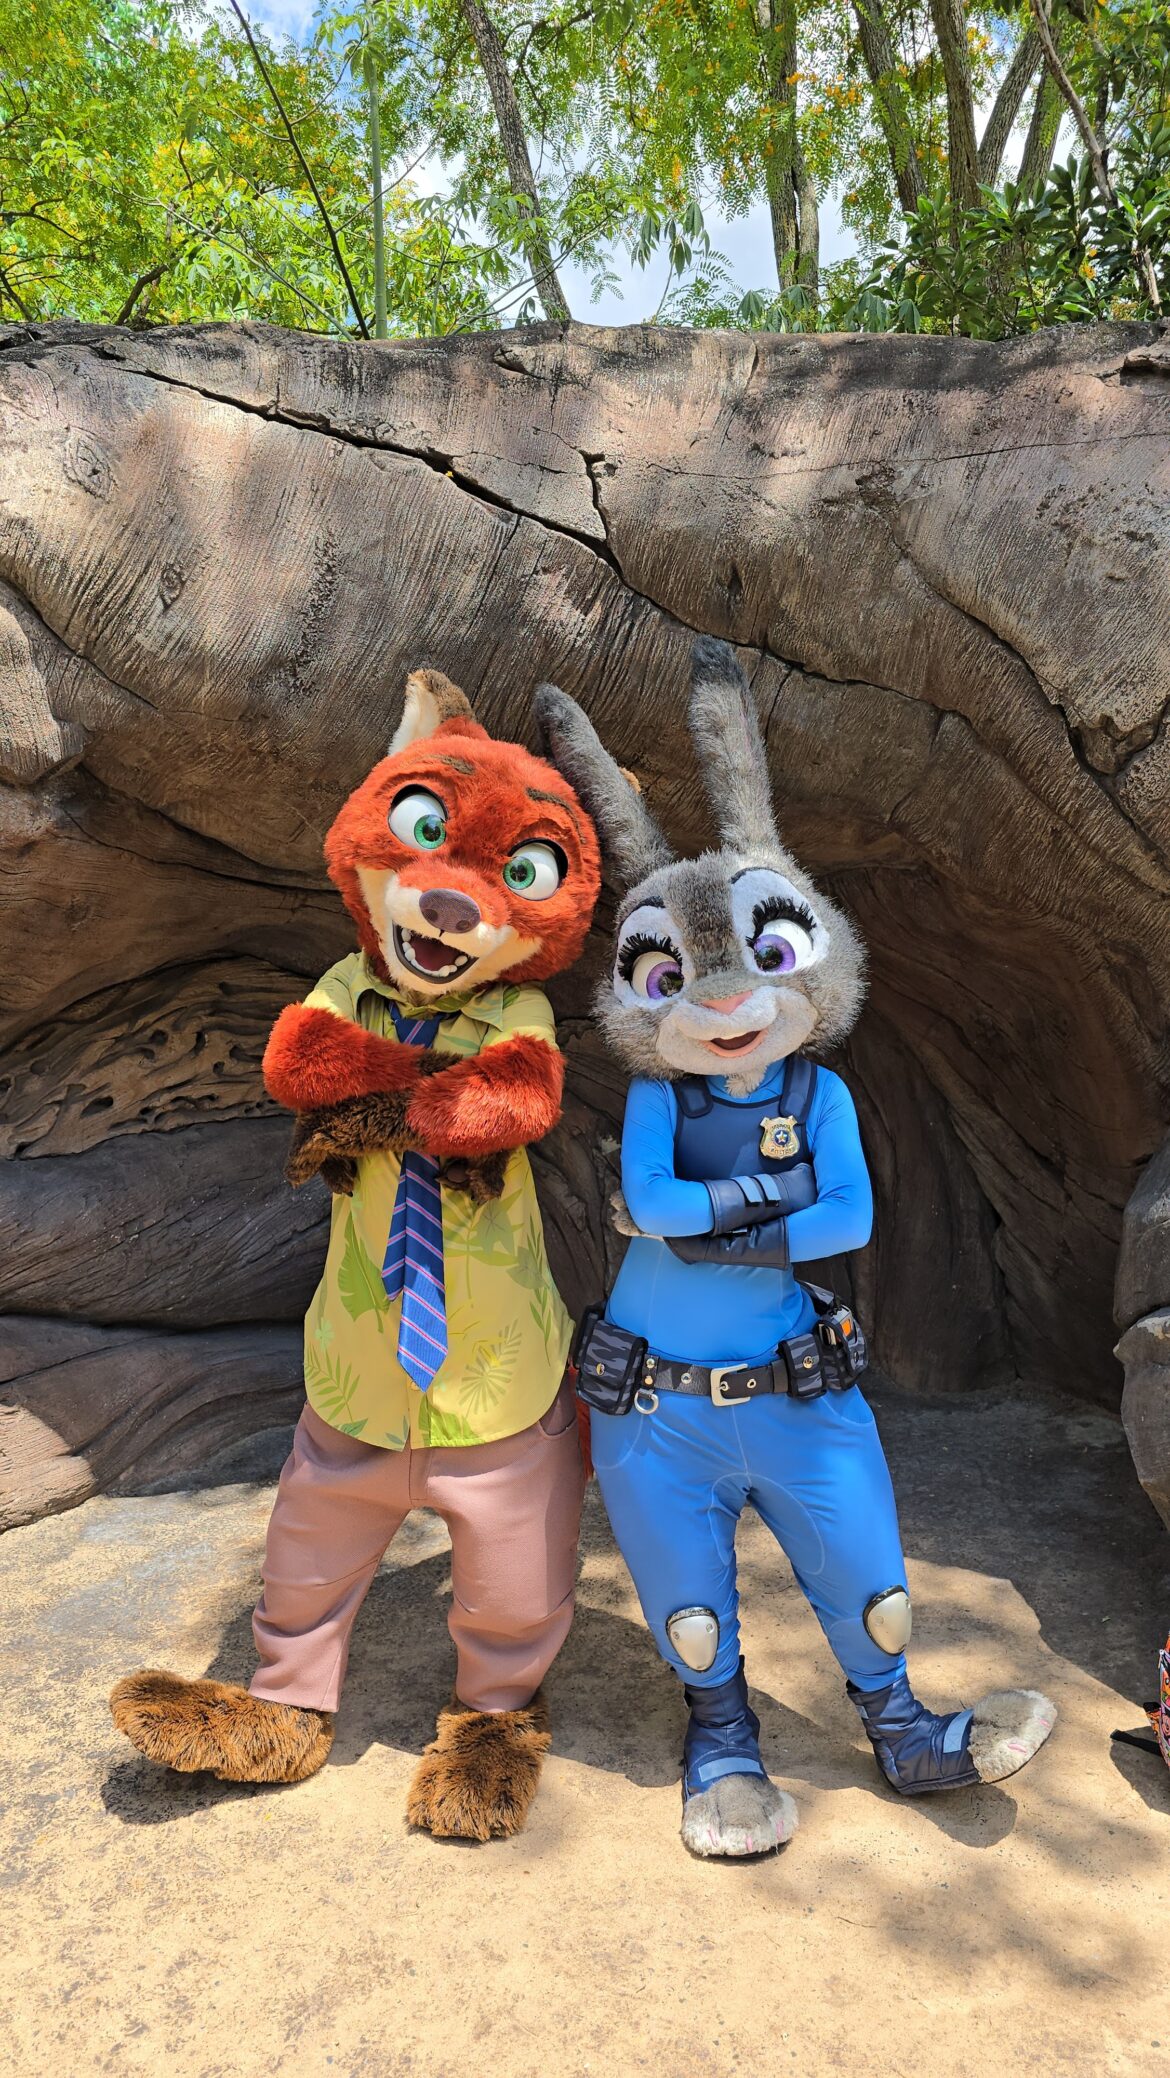 Rare Characters Appearing at Disney’s Animal Kingdom for Earth Day